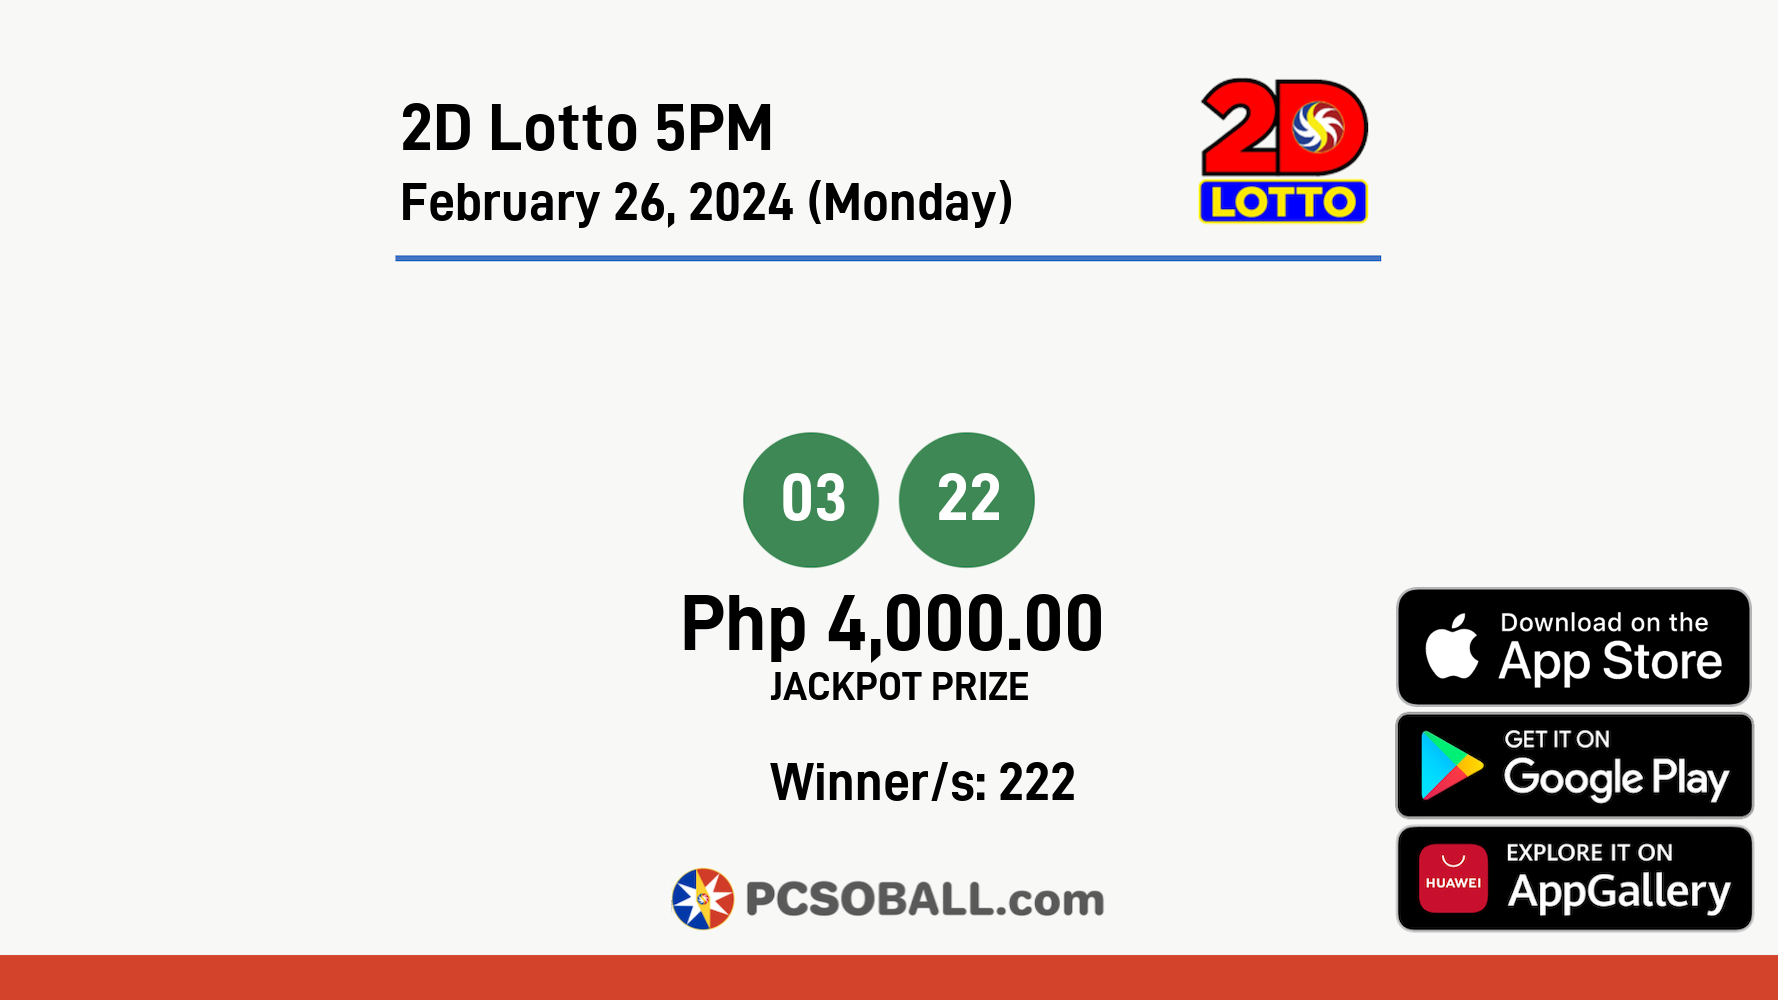 2D Lotto 5PM February 26, 2024 (Monday) Result